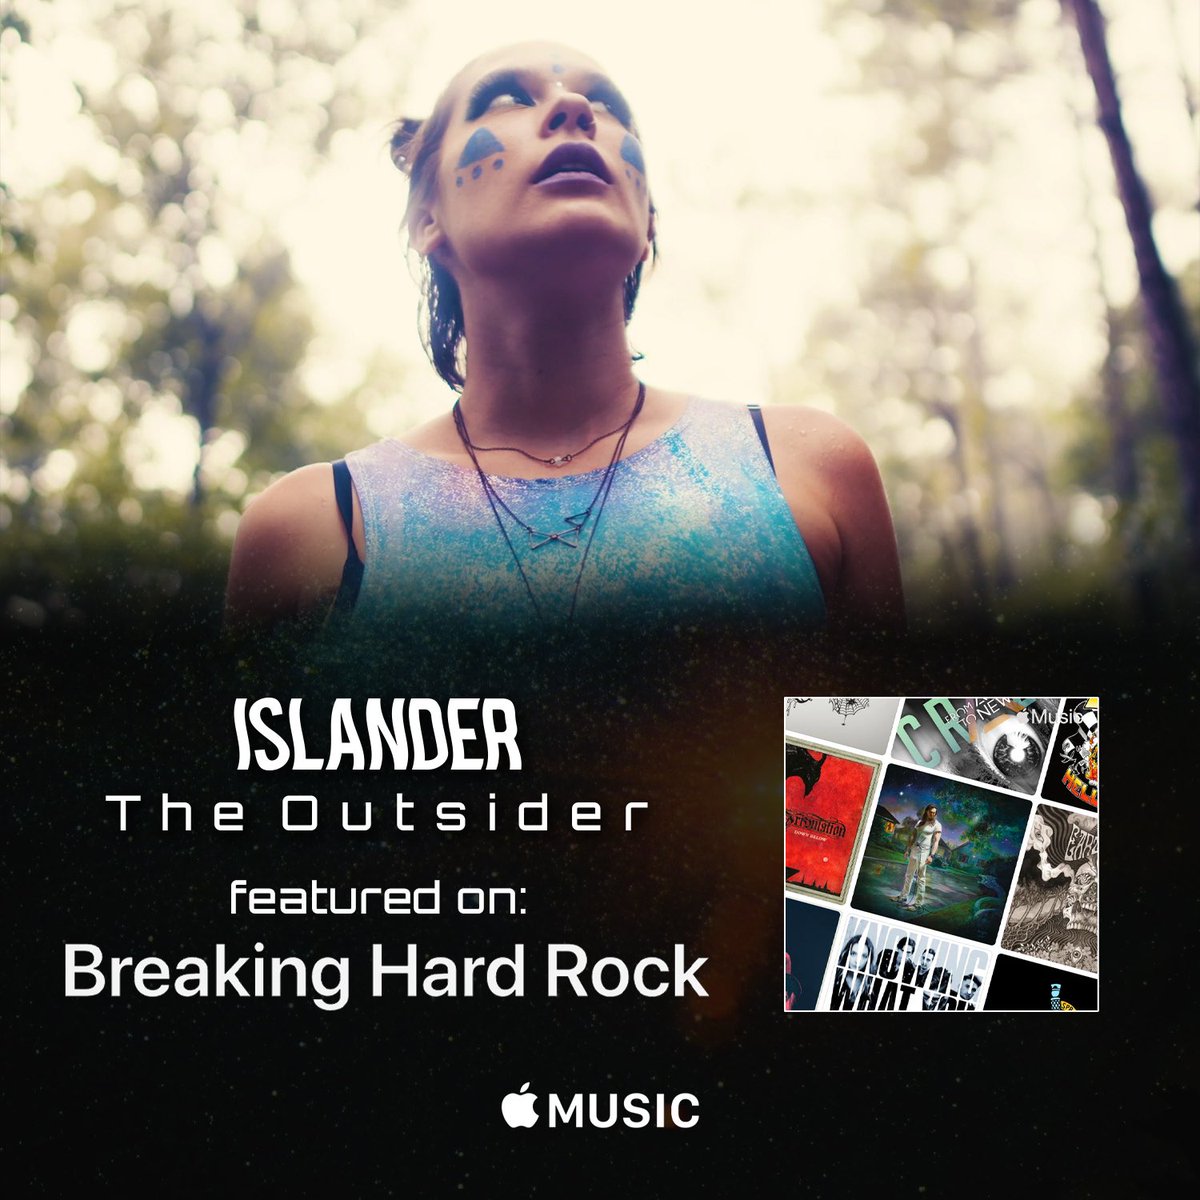 THANK YOU @suzytothec for featuring “THE OUTSIDER” on #BreakingHardRock on @AppleMusic! Go give this awesome playlist a listen now!

islander.ffm.to/theoutsider